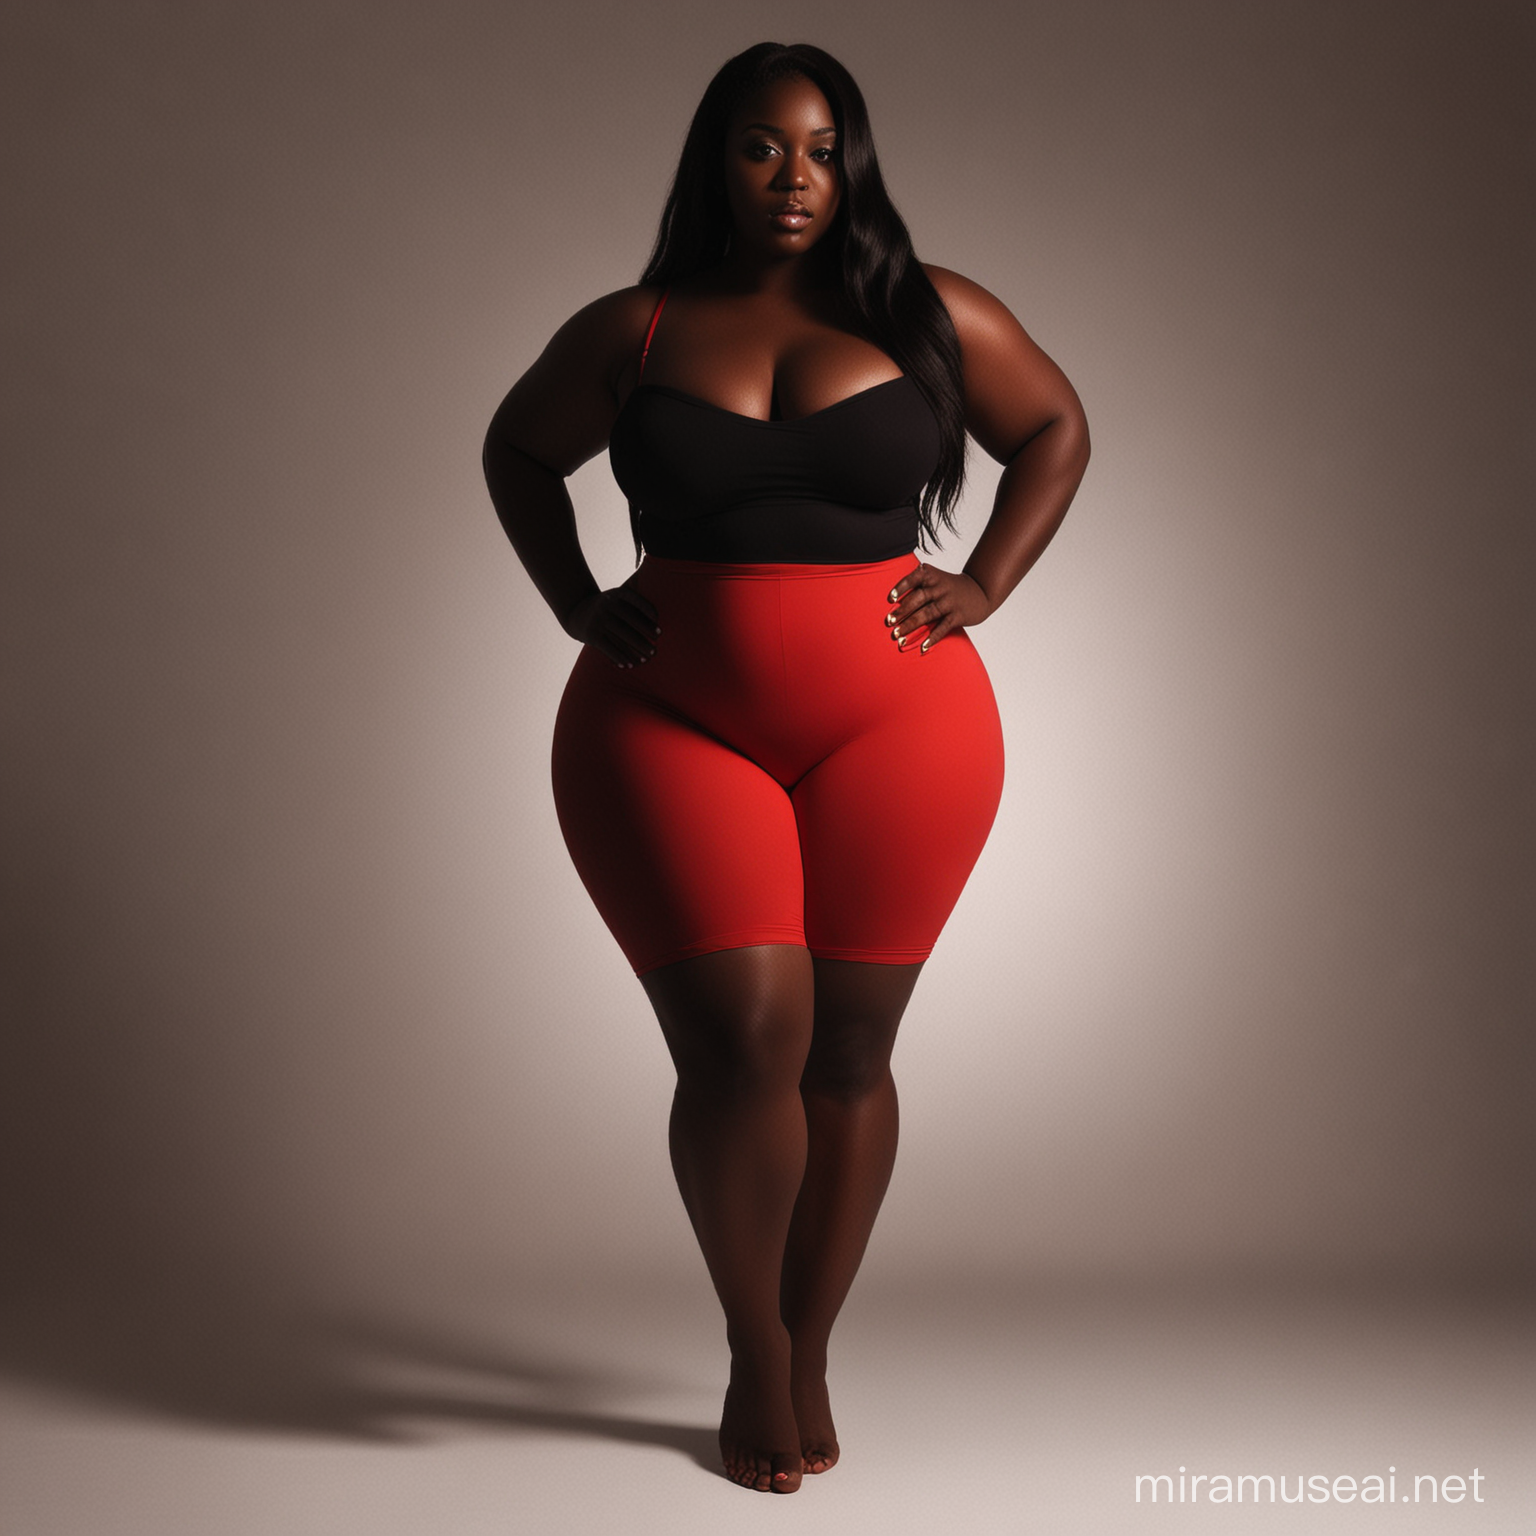 Bold Plus Size Woman in Red Silhouette Empowering Figure in Dim Light